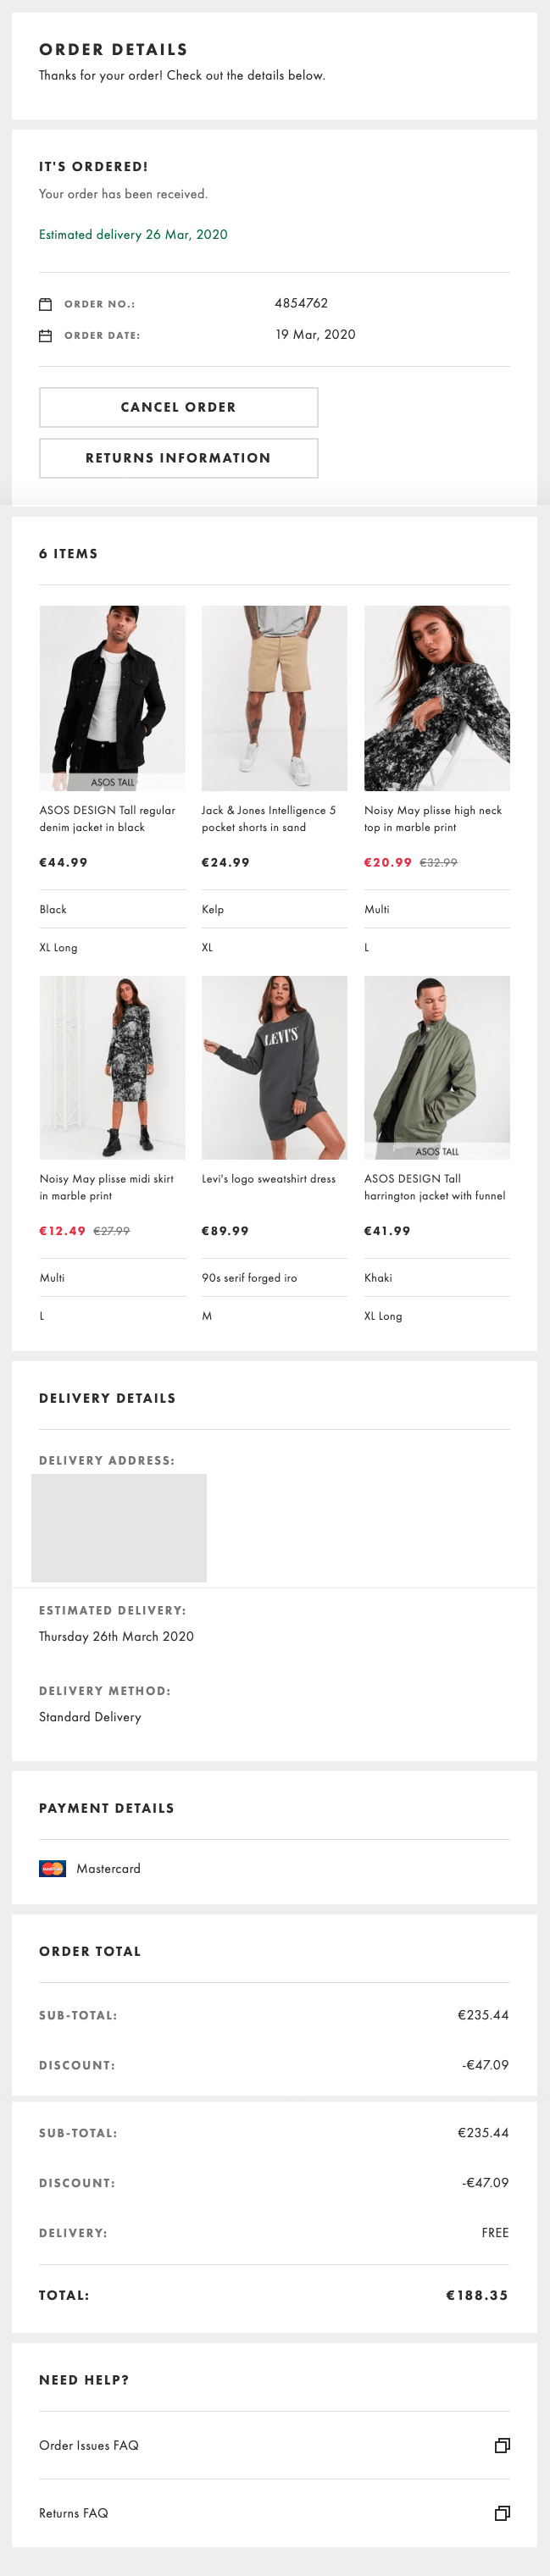 order confirmation page by Asos